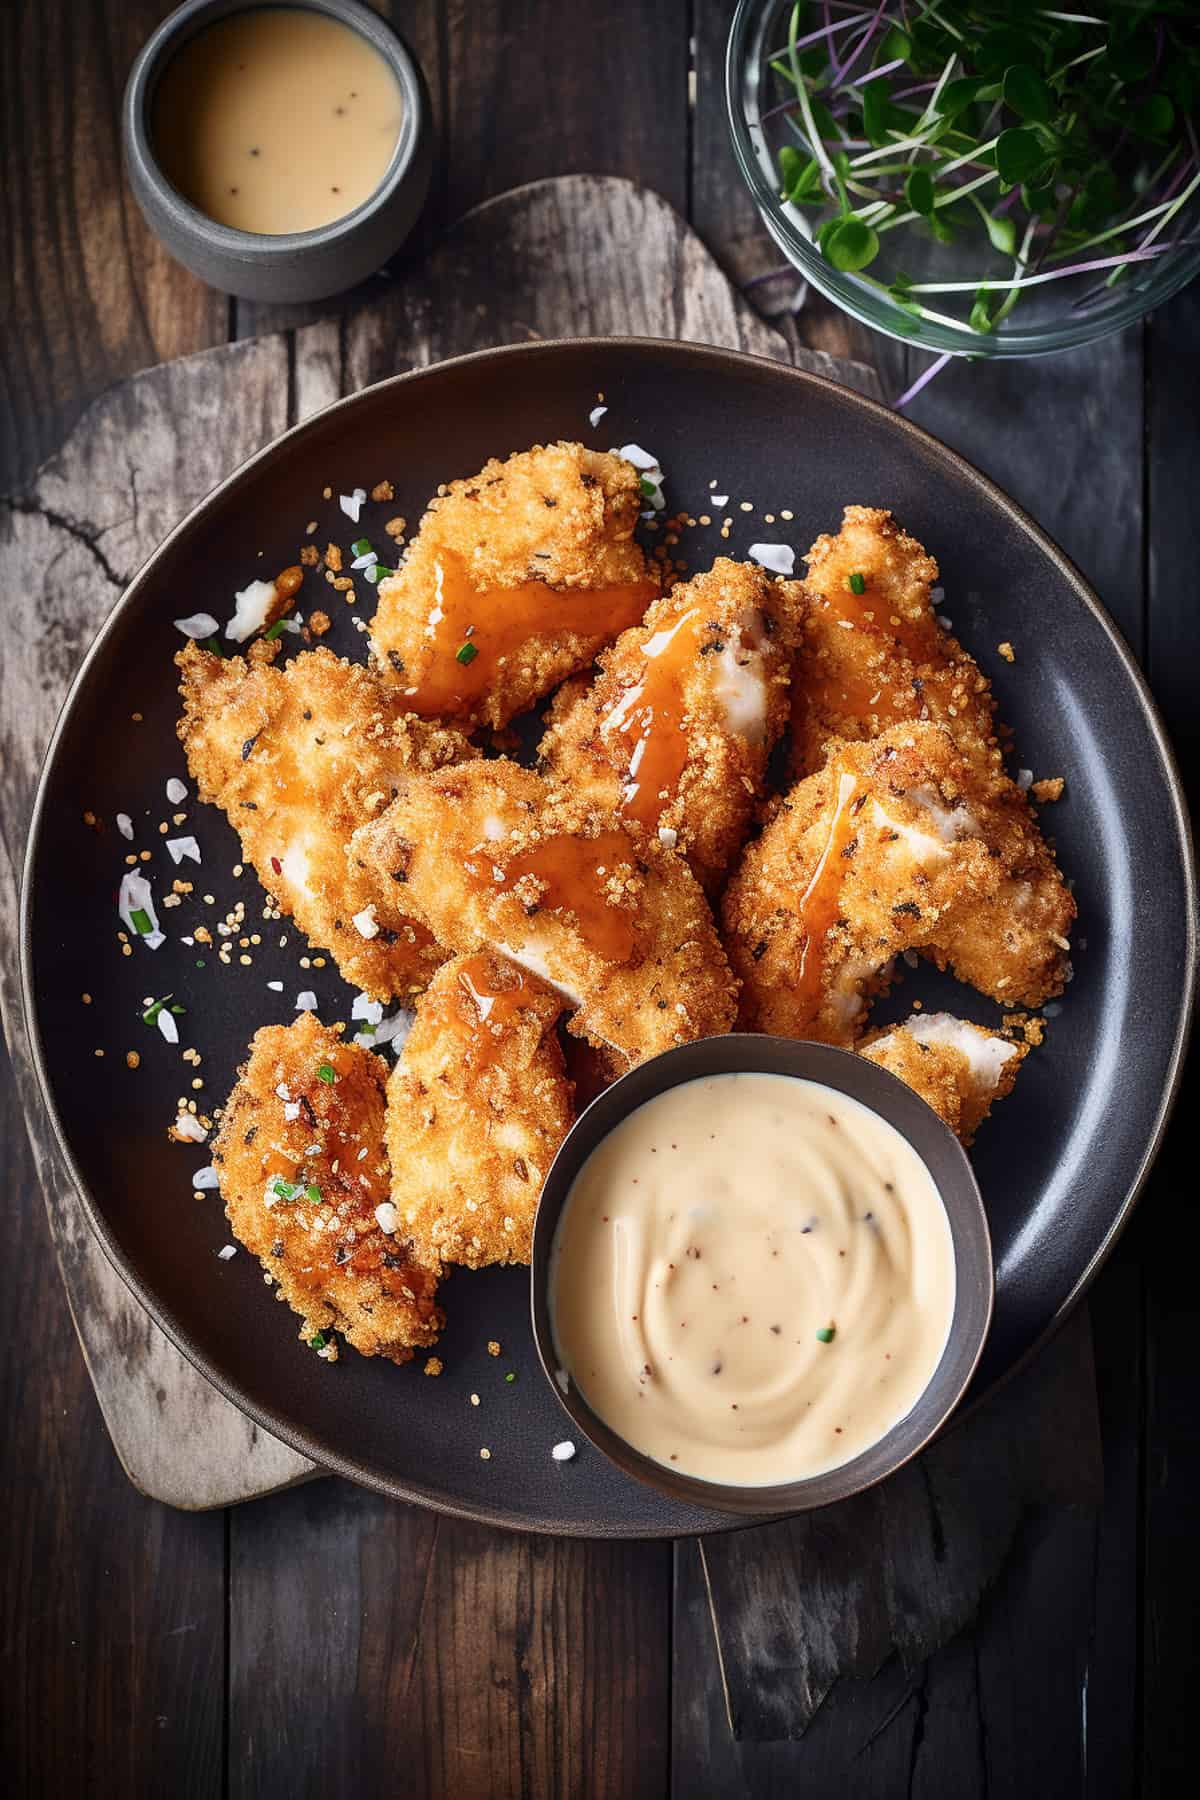 Chicken goujons on a plate with dipping sauce.